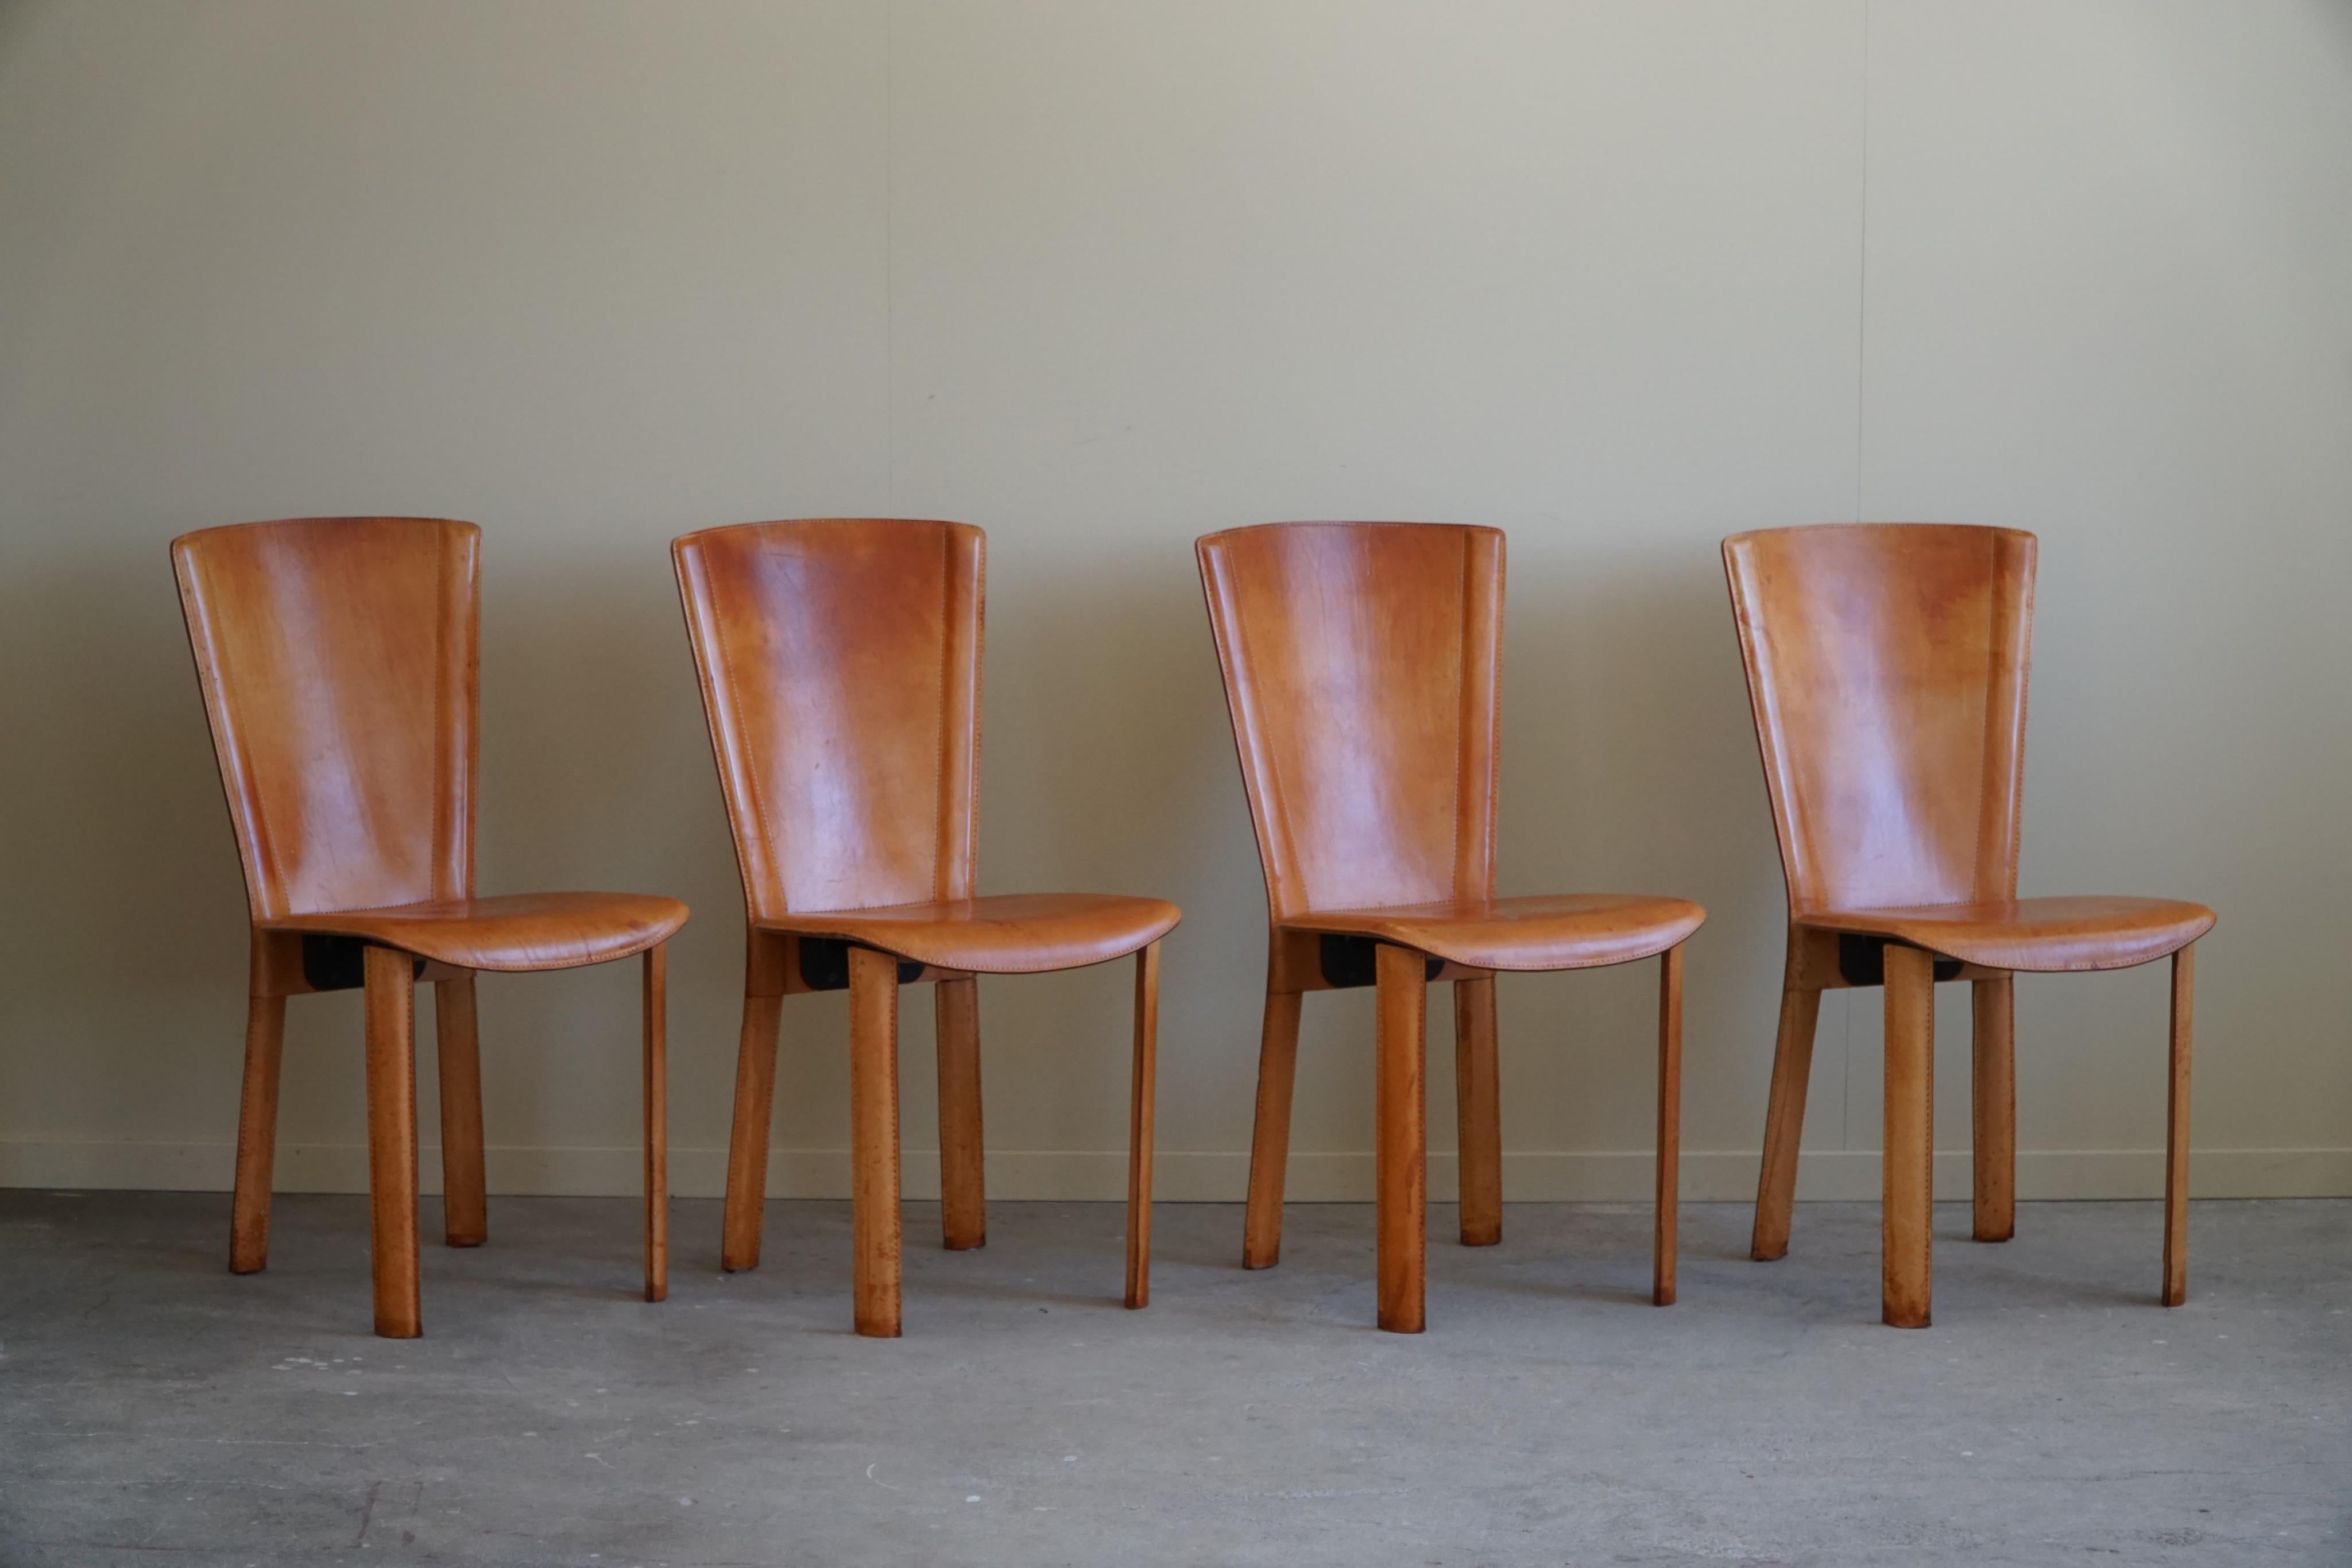 Italian Modern, Set of 4 Dining Chairs in Cognac Leather, Mario Bellini, 1970s 10